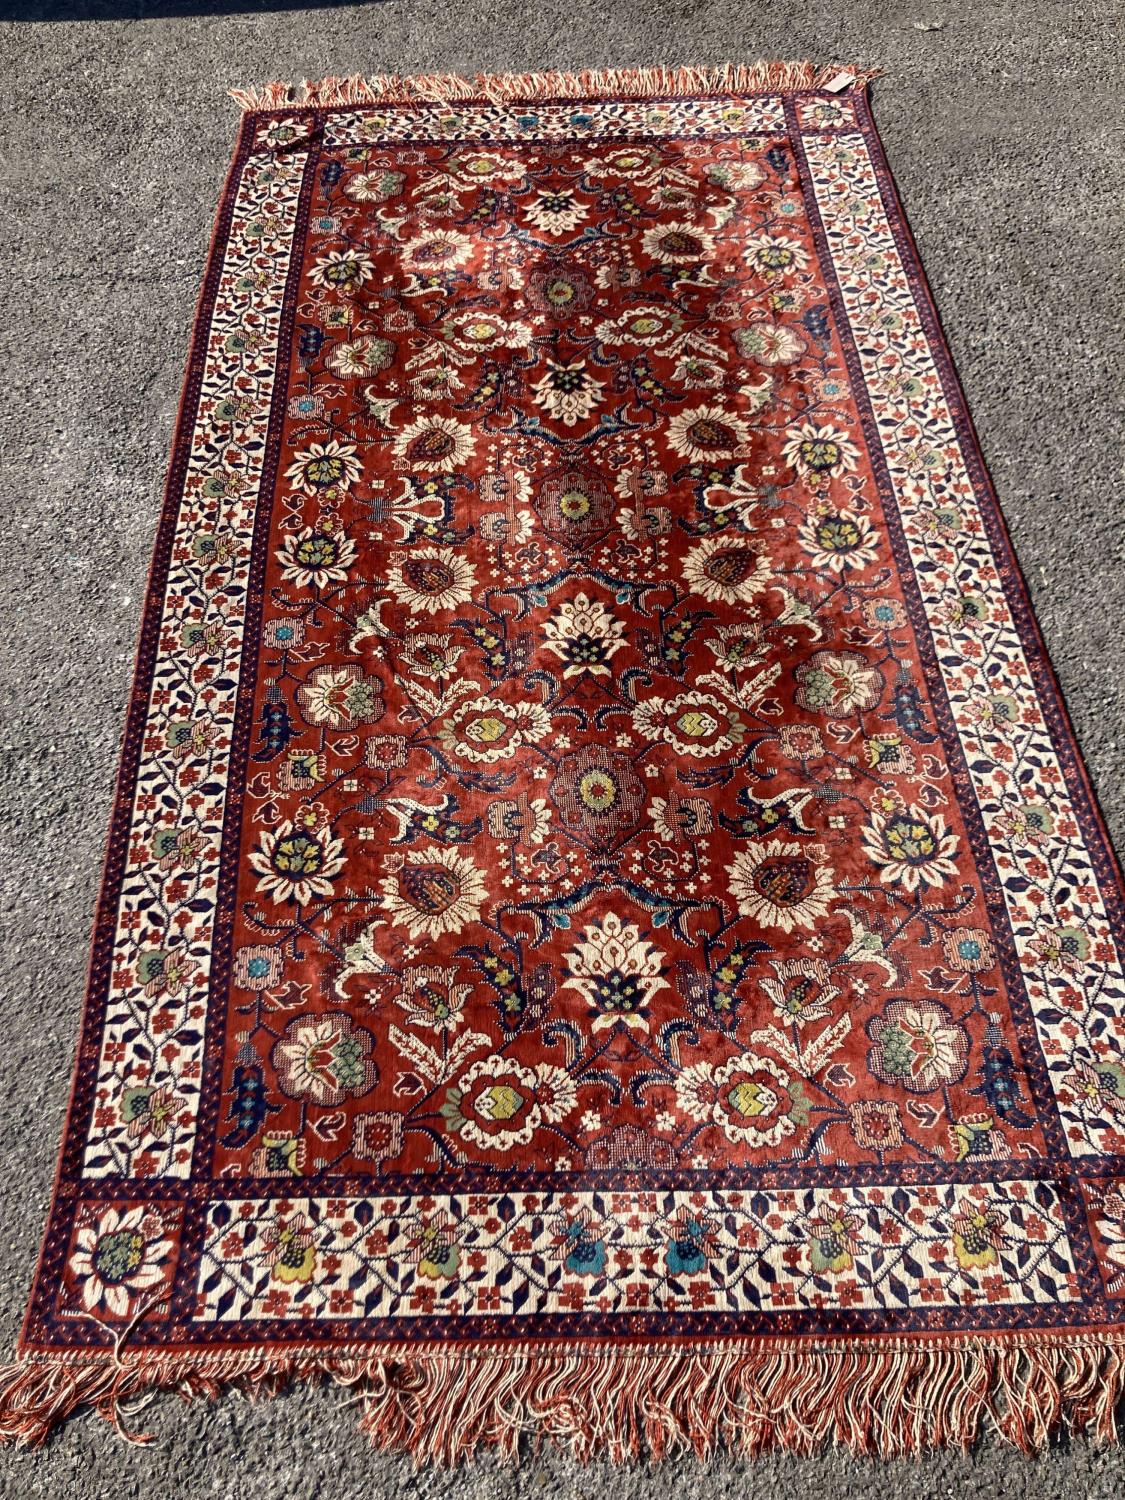 A large embroidered silk rug with a claret red ground interspersed with symmetrical foliate